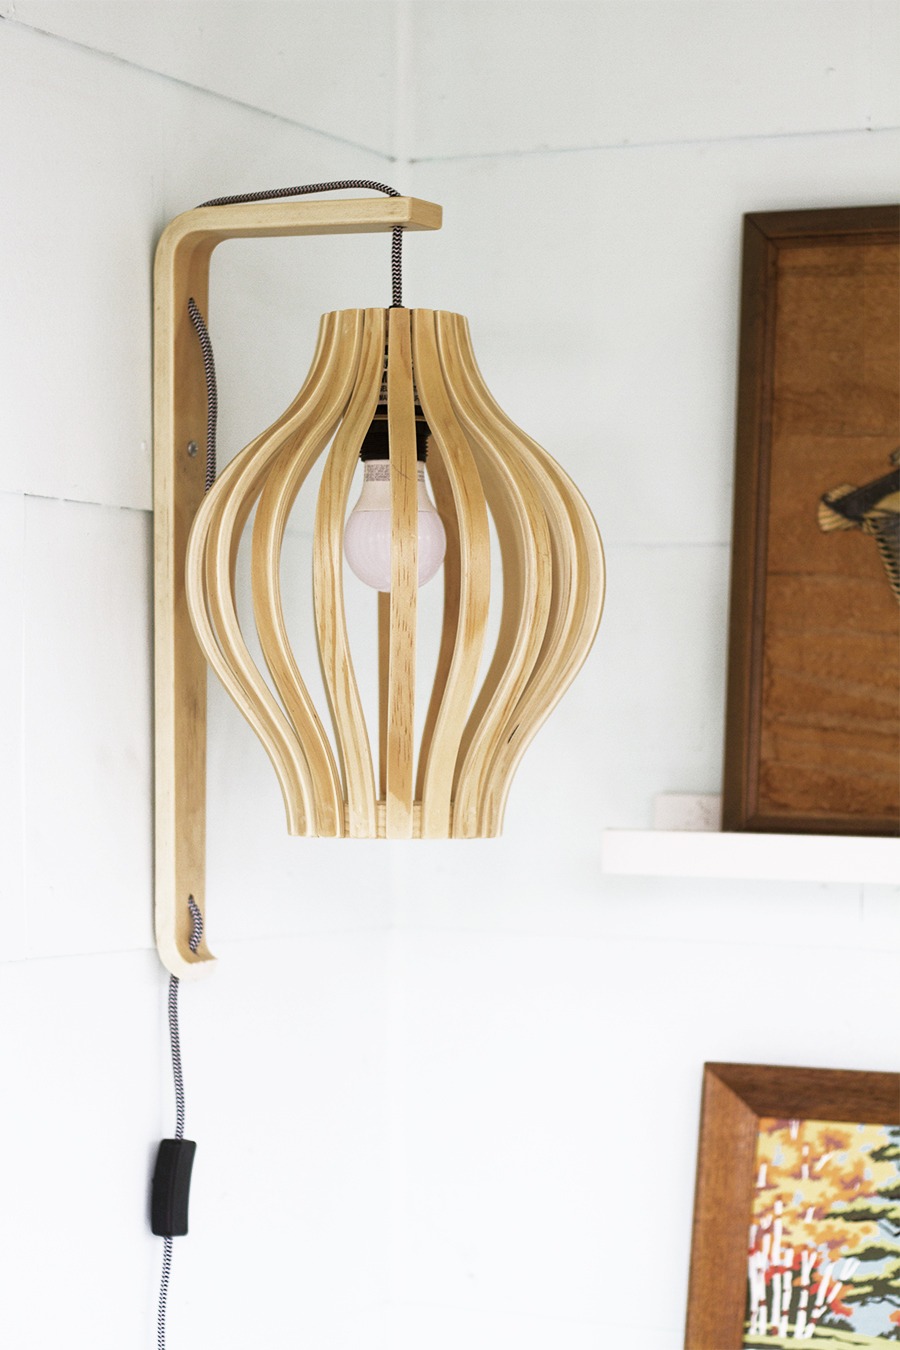 How to Make a Corded Lamp Look Hardwired - Honeybear Lane